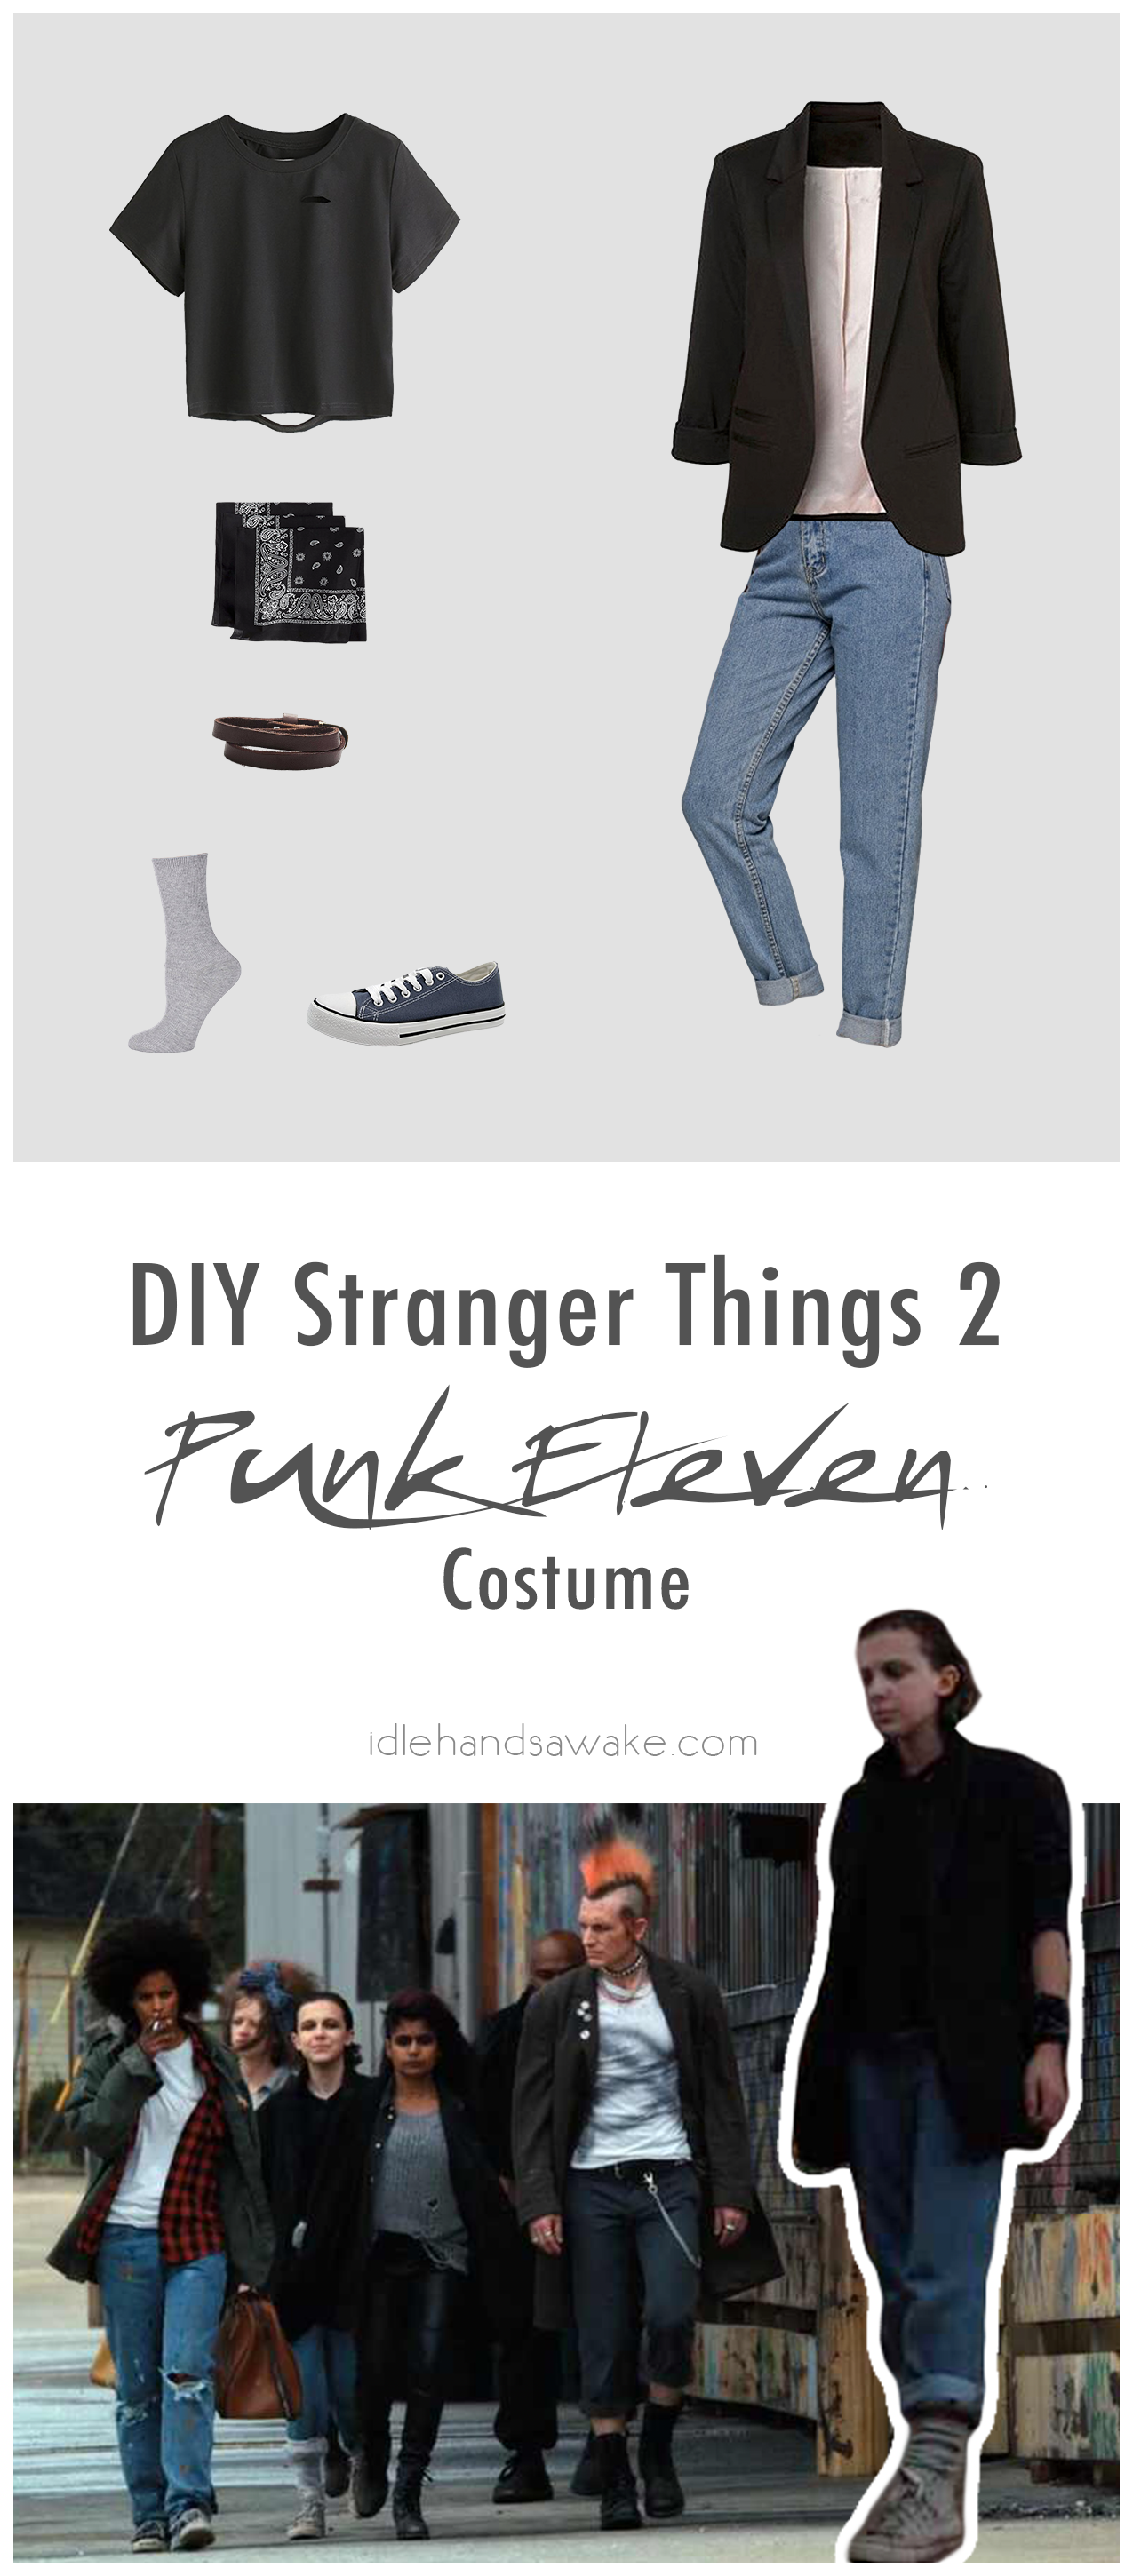 Don't be a mouthbreather -- grab everything you need for a bitchin' DIY Stranger Things 2 Punk Eleven costume. Let the badassery begin.